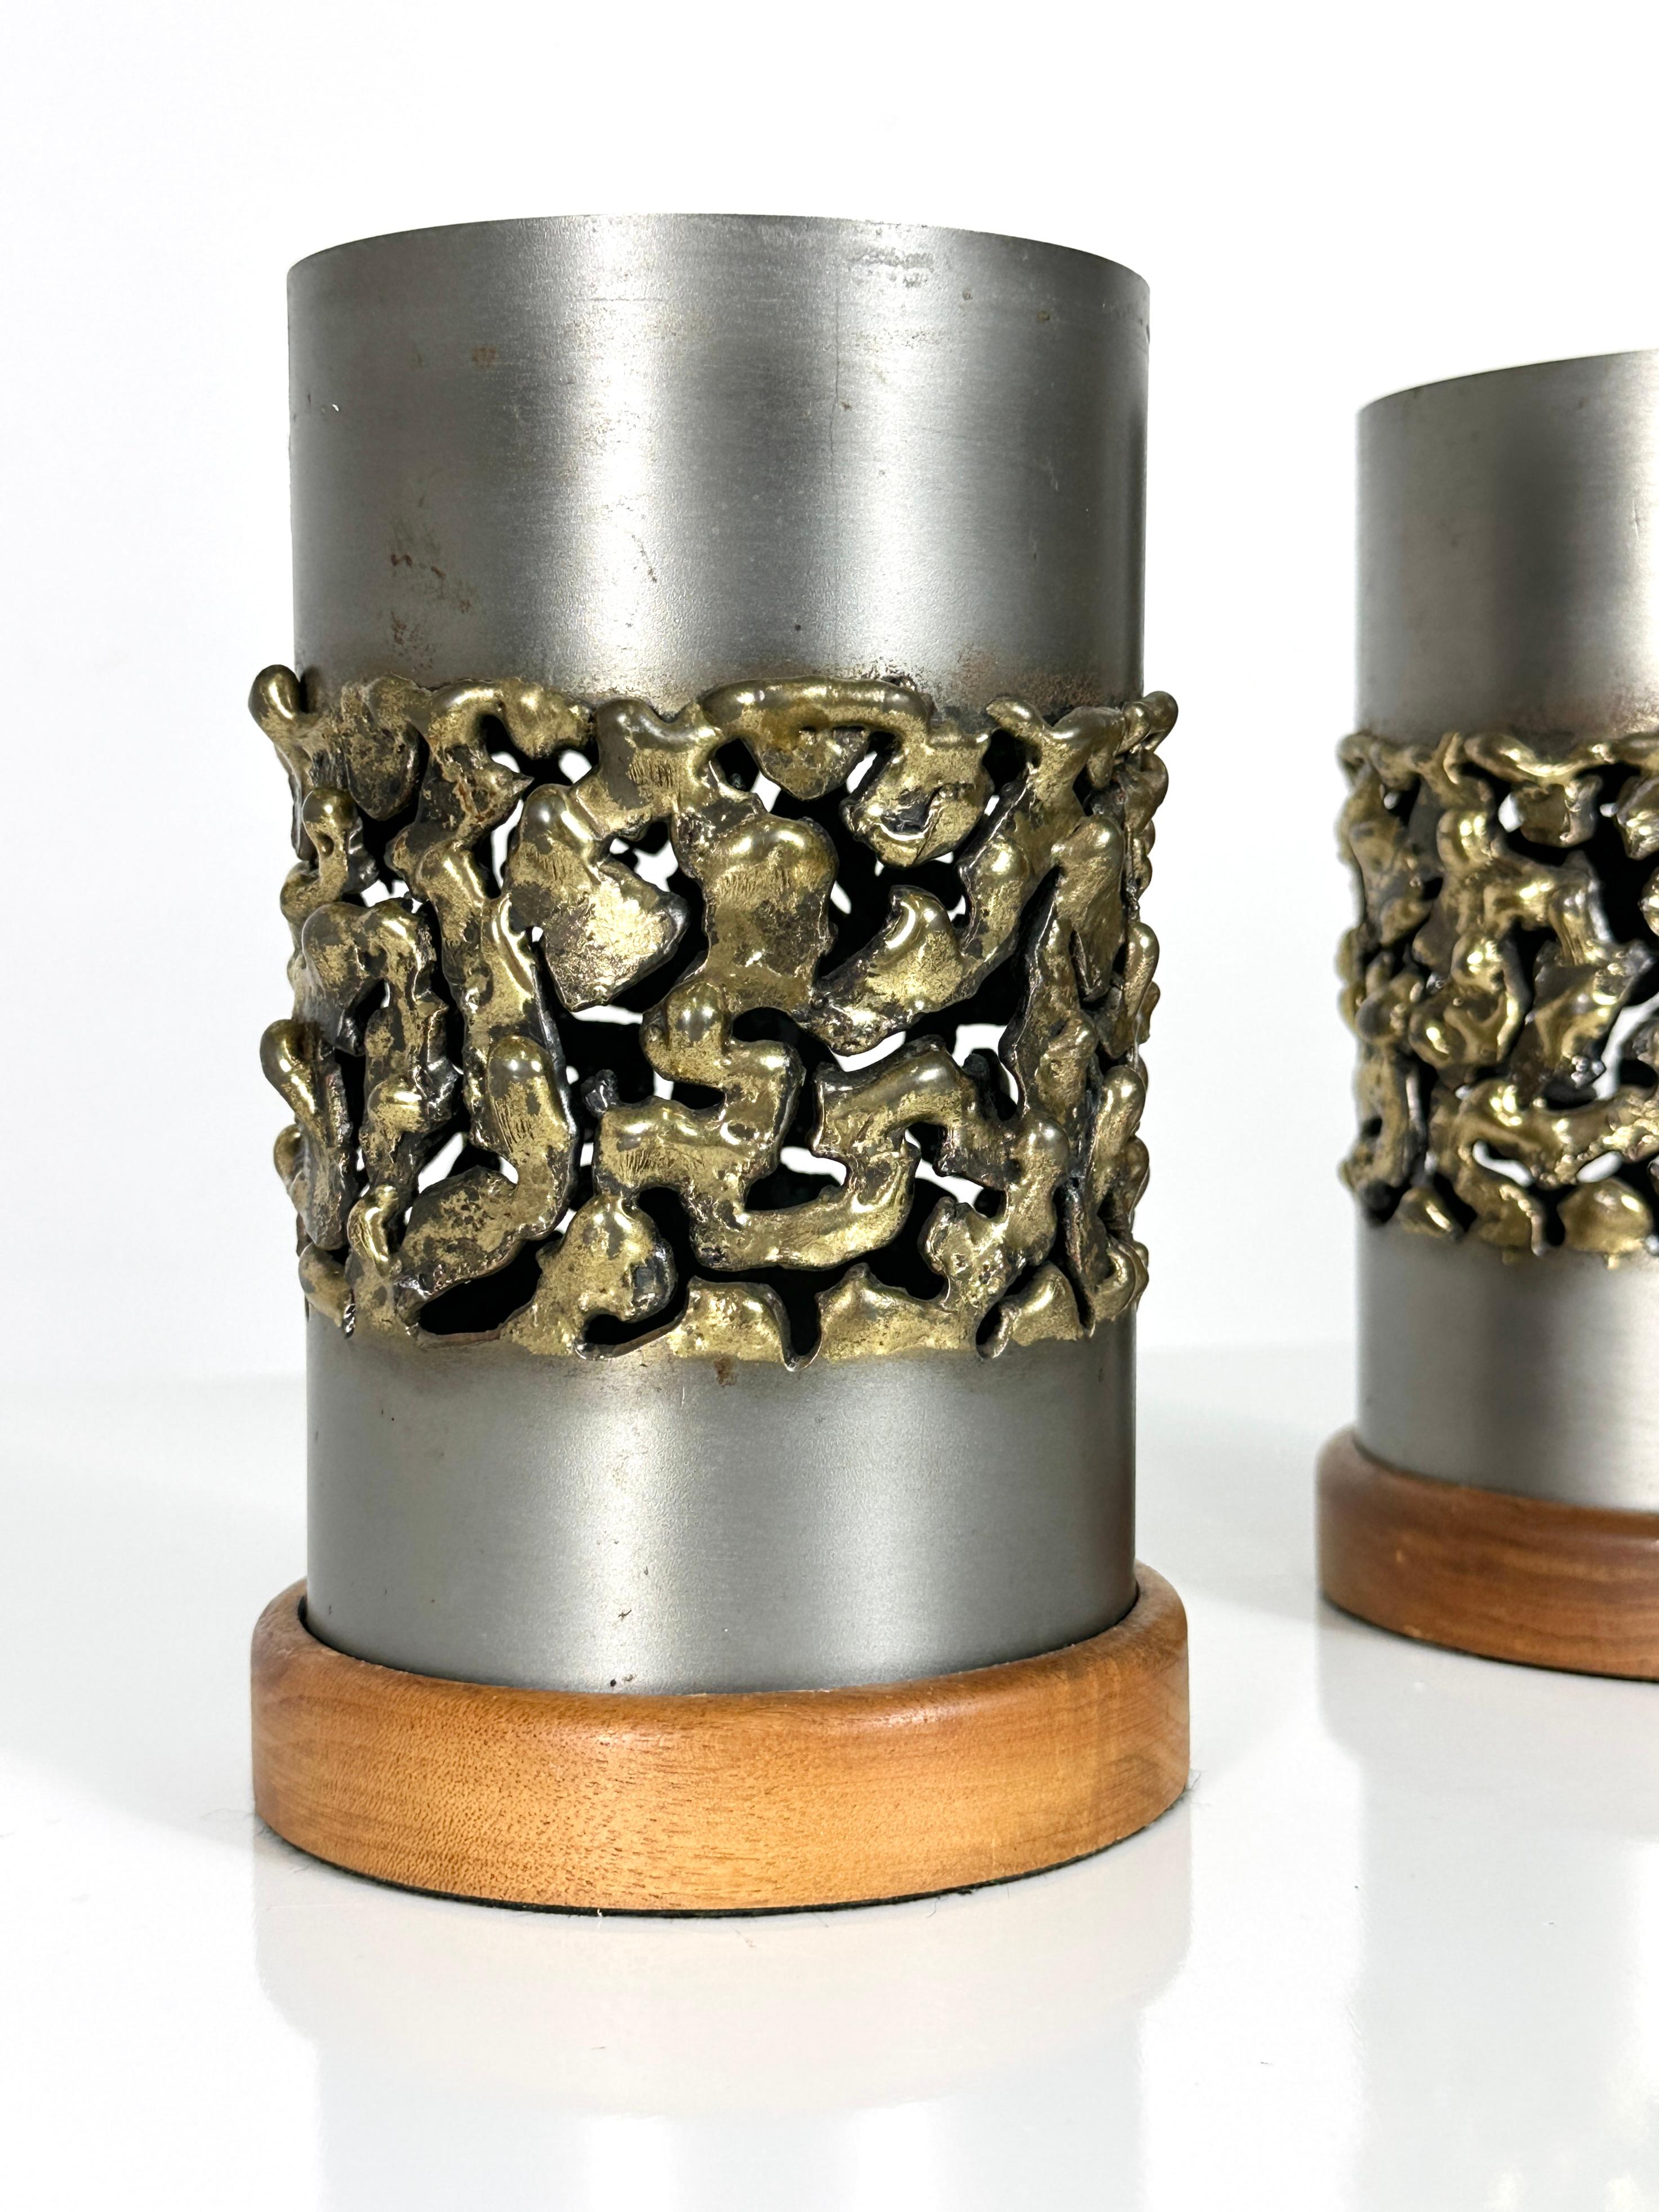 Pair of Mid Century Modern Brutalist Hurricane Candle Holders by Jerry Davis In Good Condition For Sale In Troy, MI